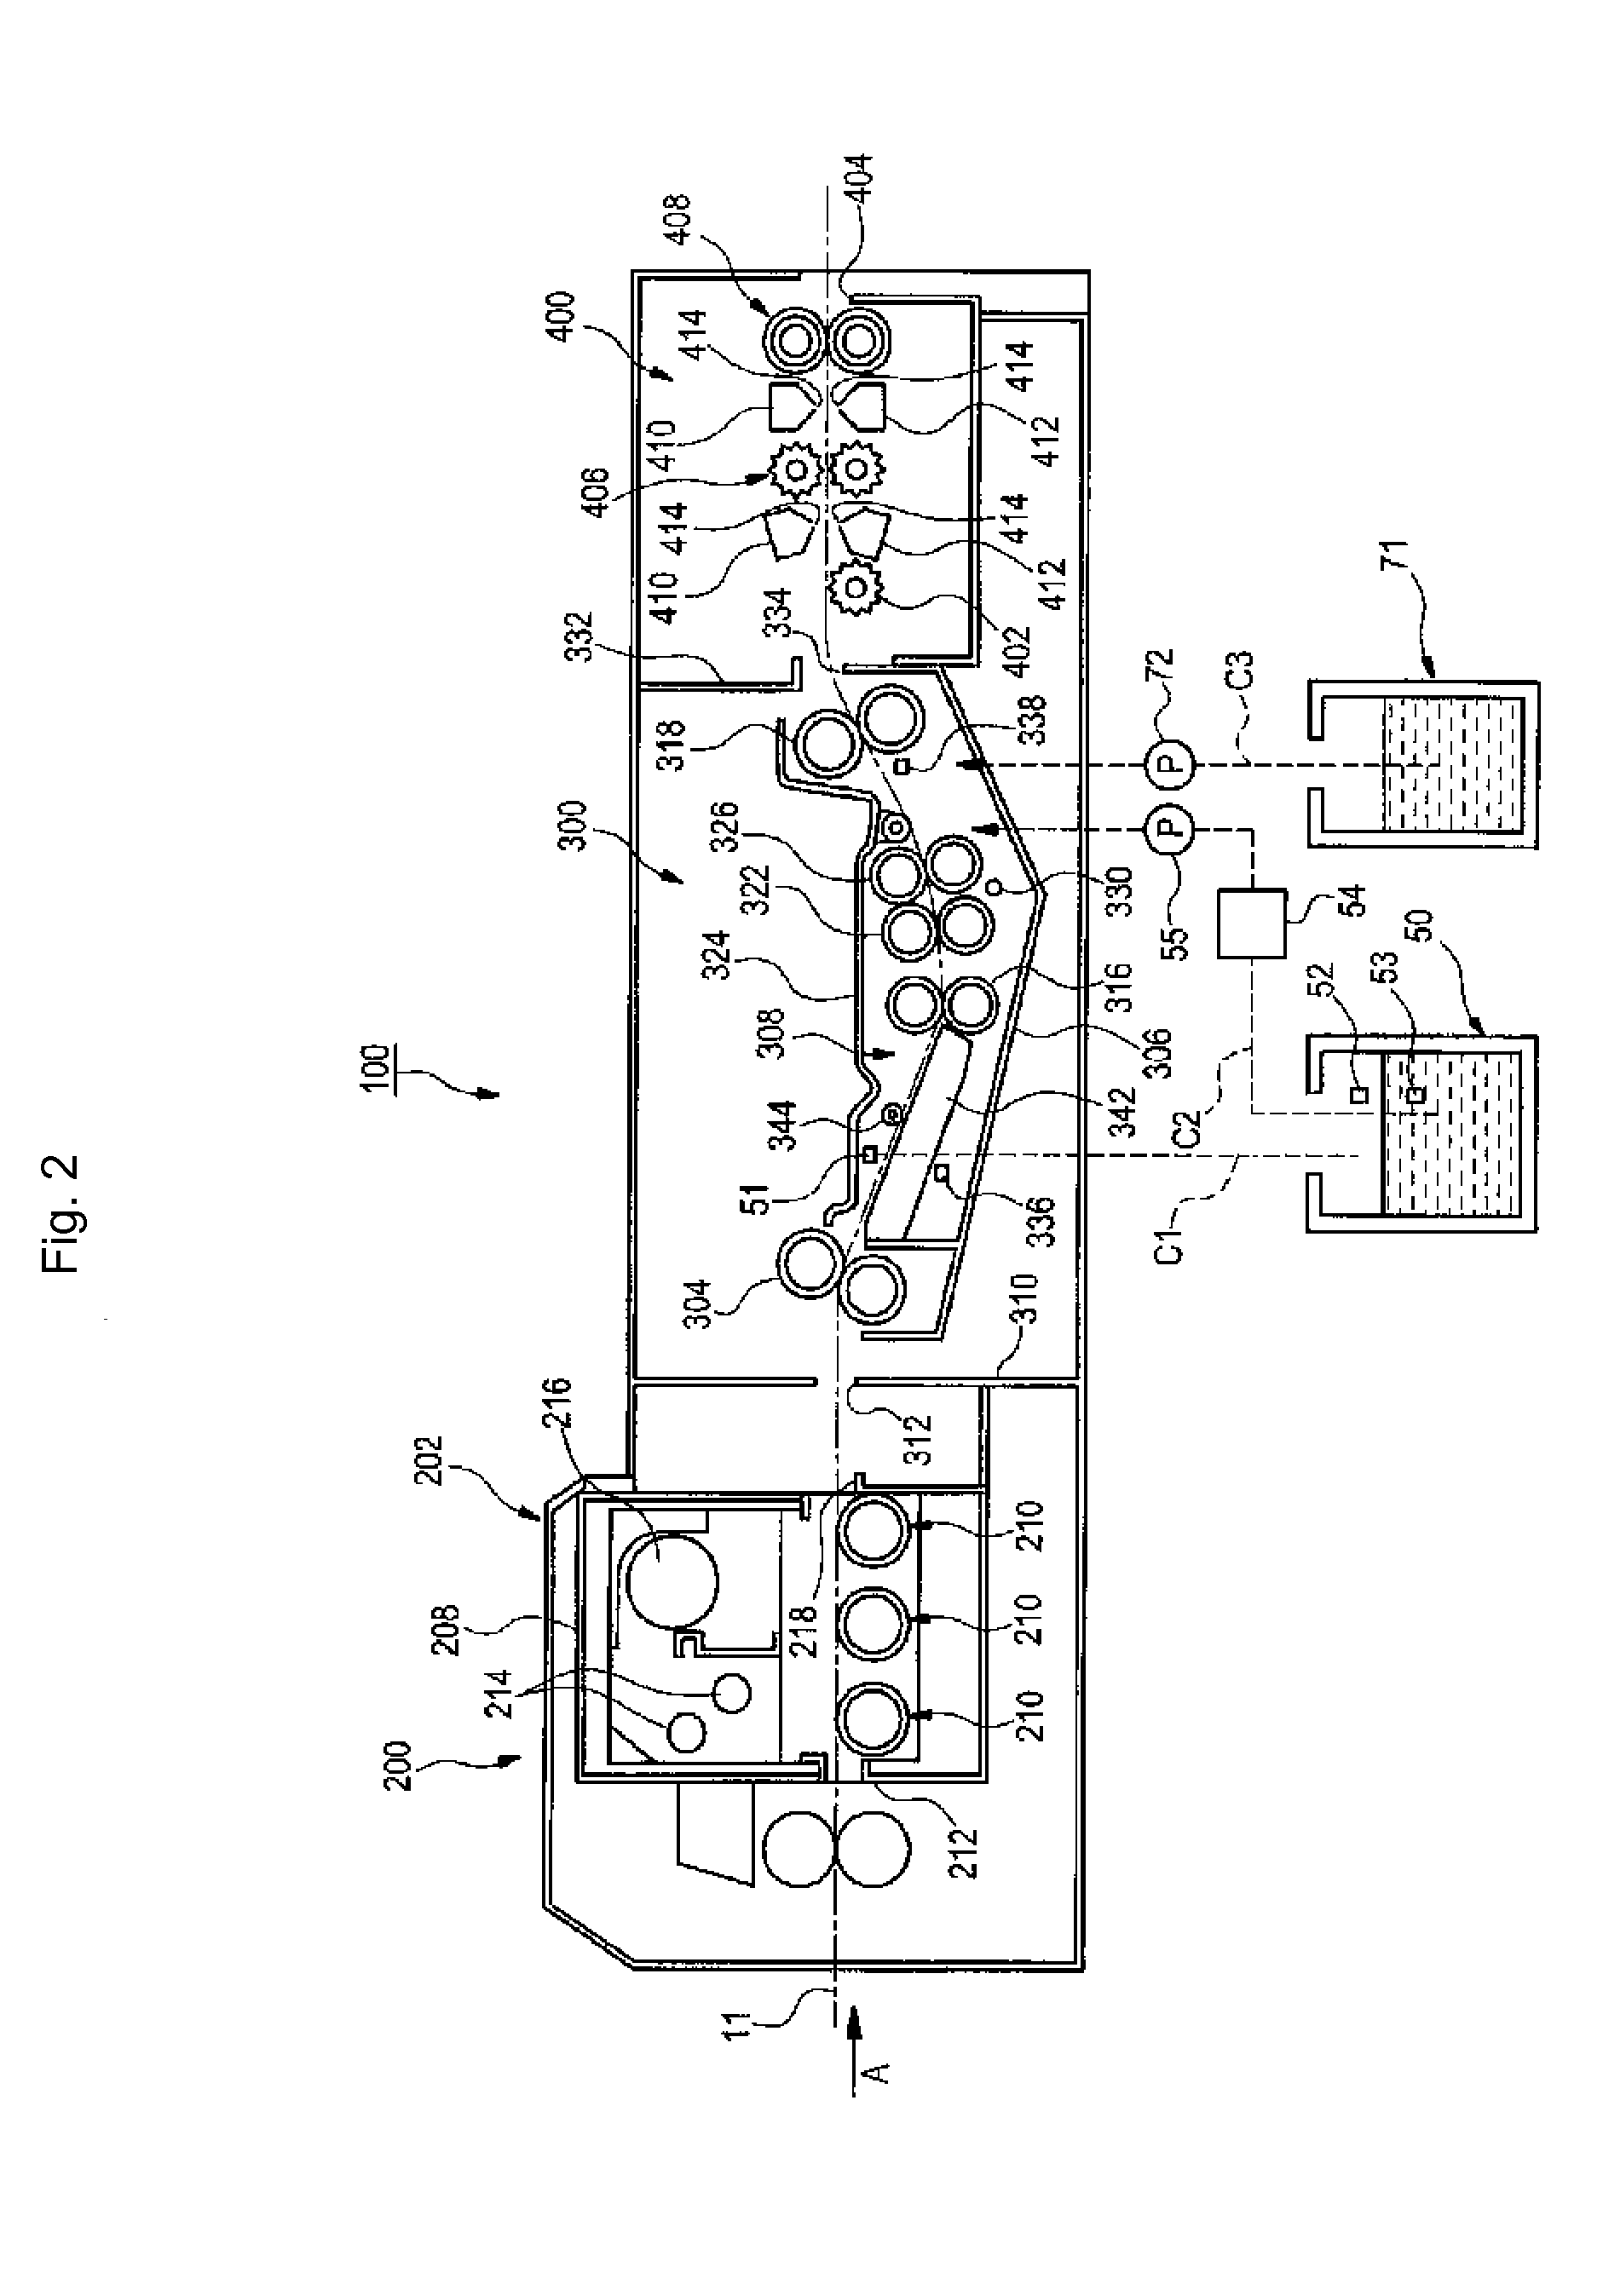 Lithographic printing plate precursors and processes for preparing lithographic printing plates